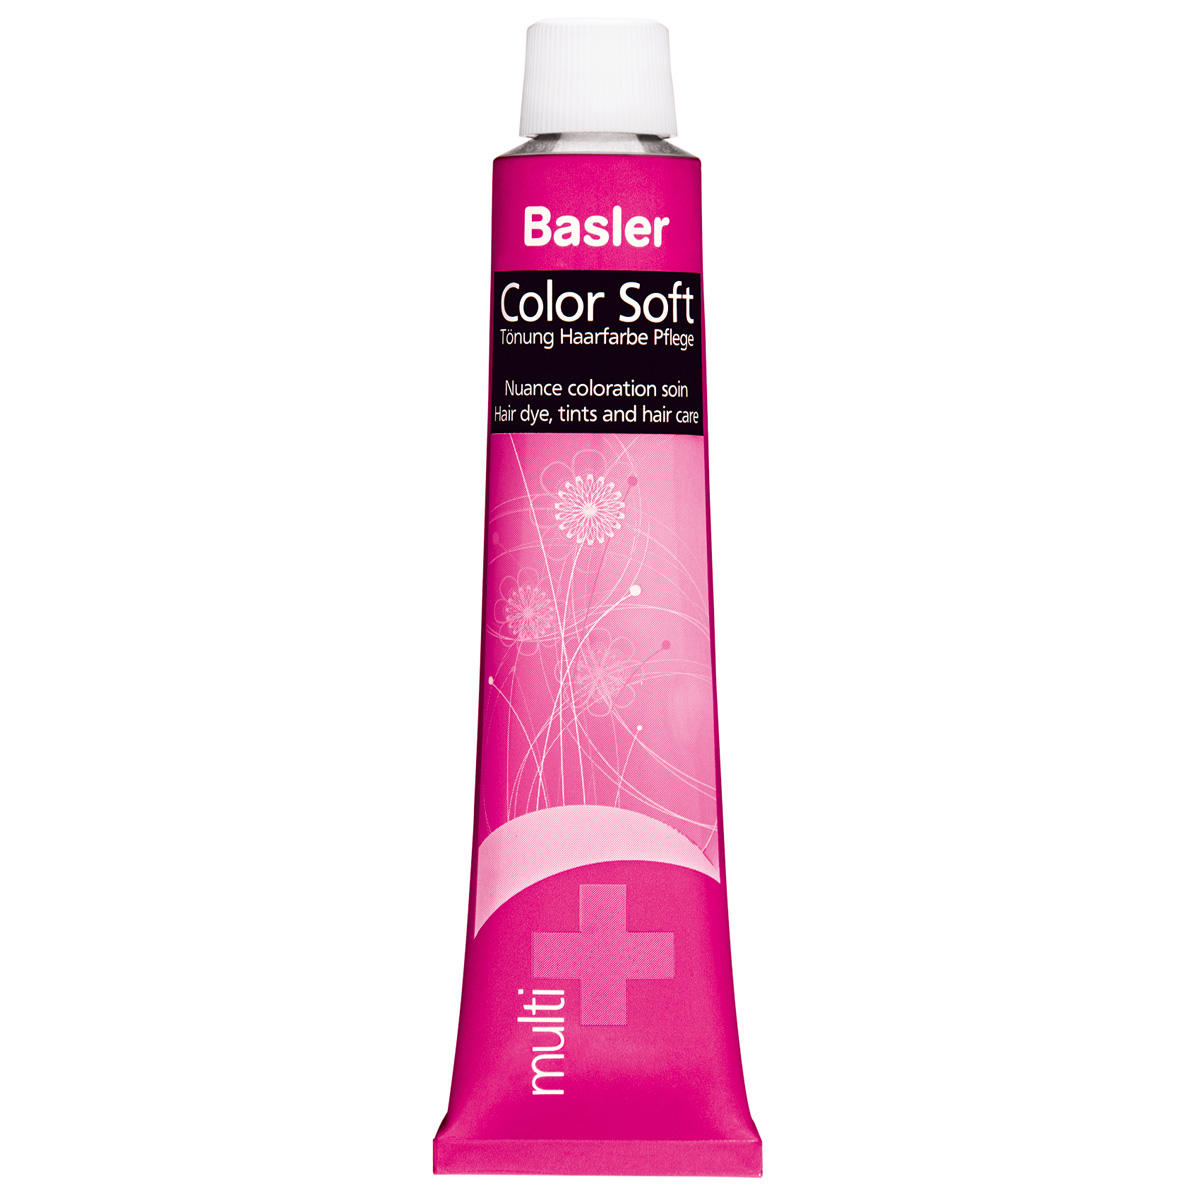 Basler Color Soft multi Caring Cream Color 7/7 medium blond brown - fawn, tube 60 ml - 1